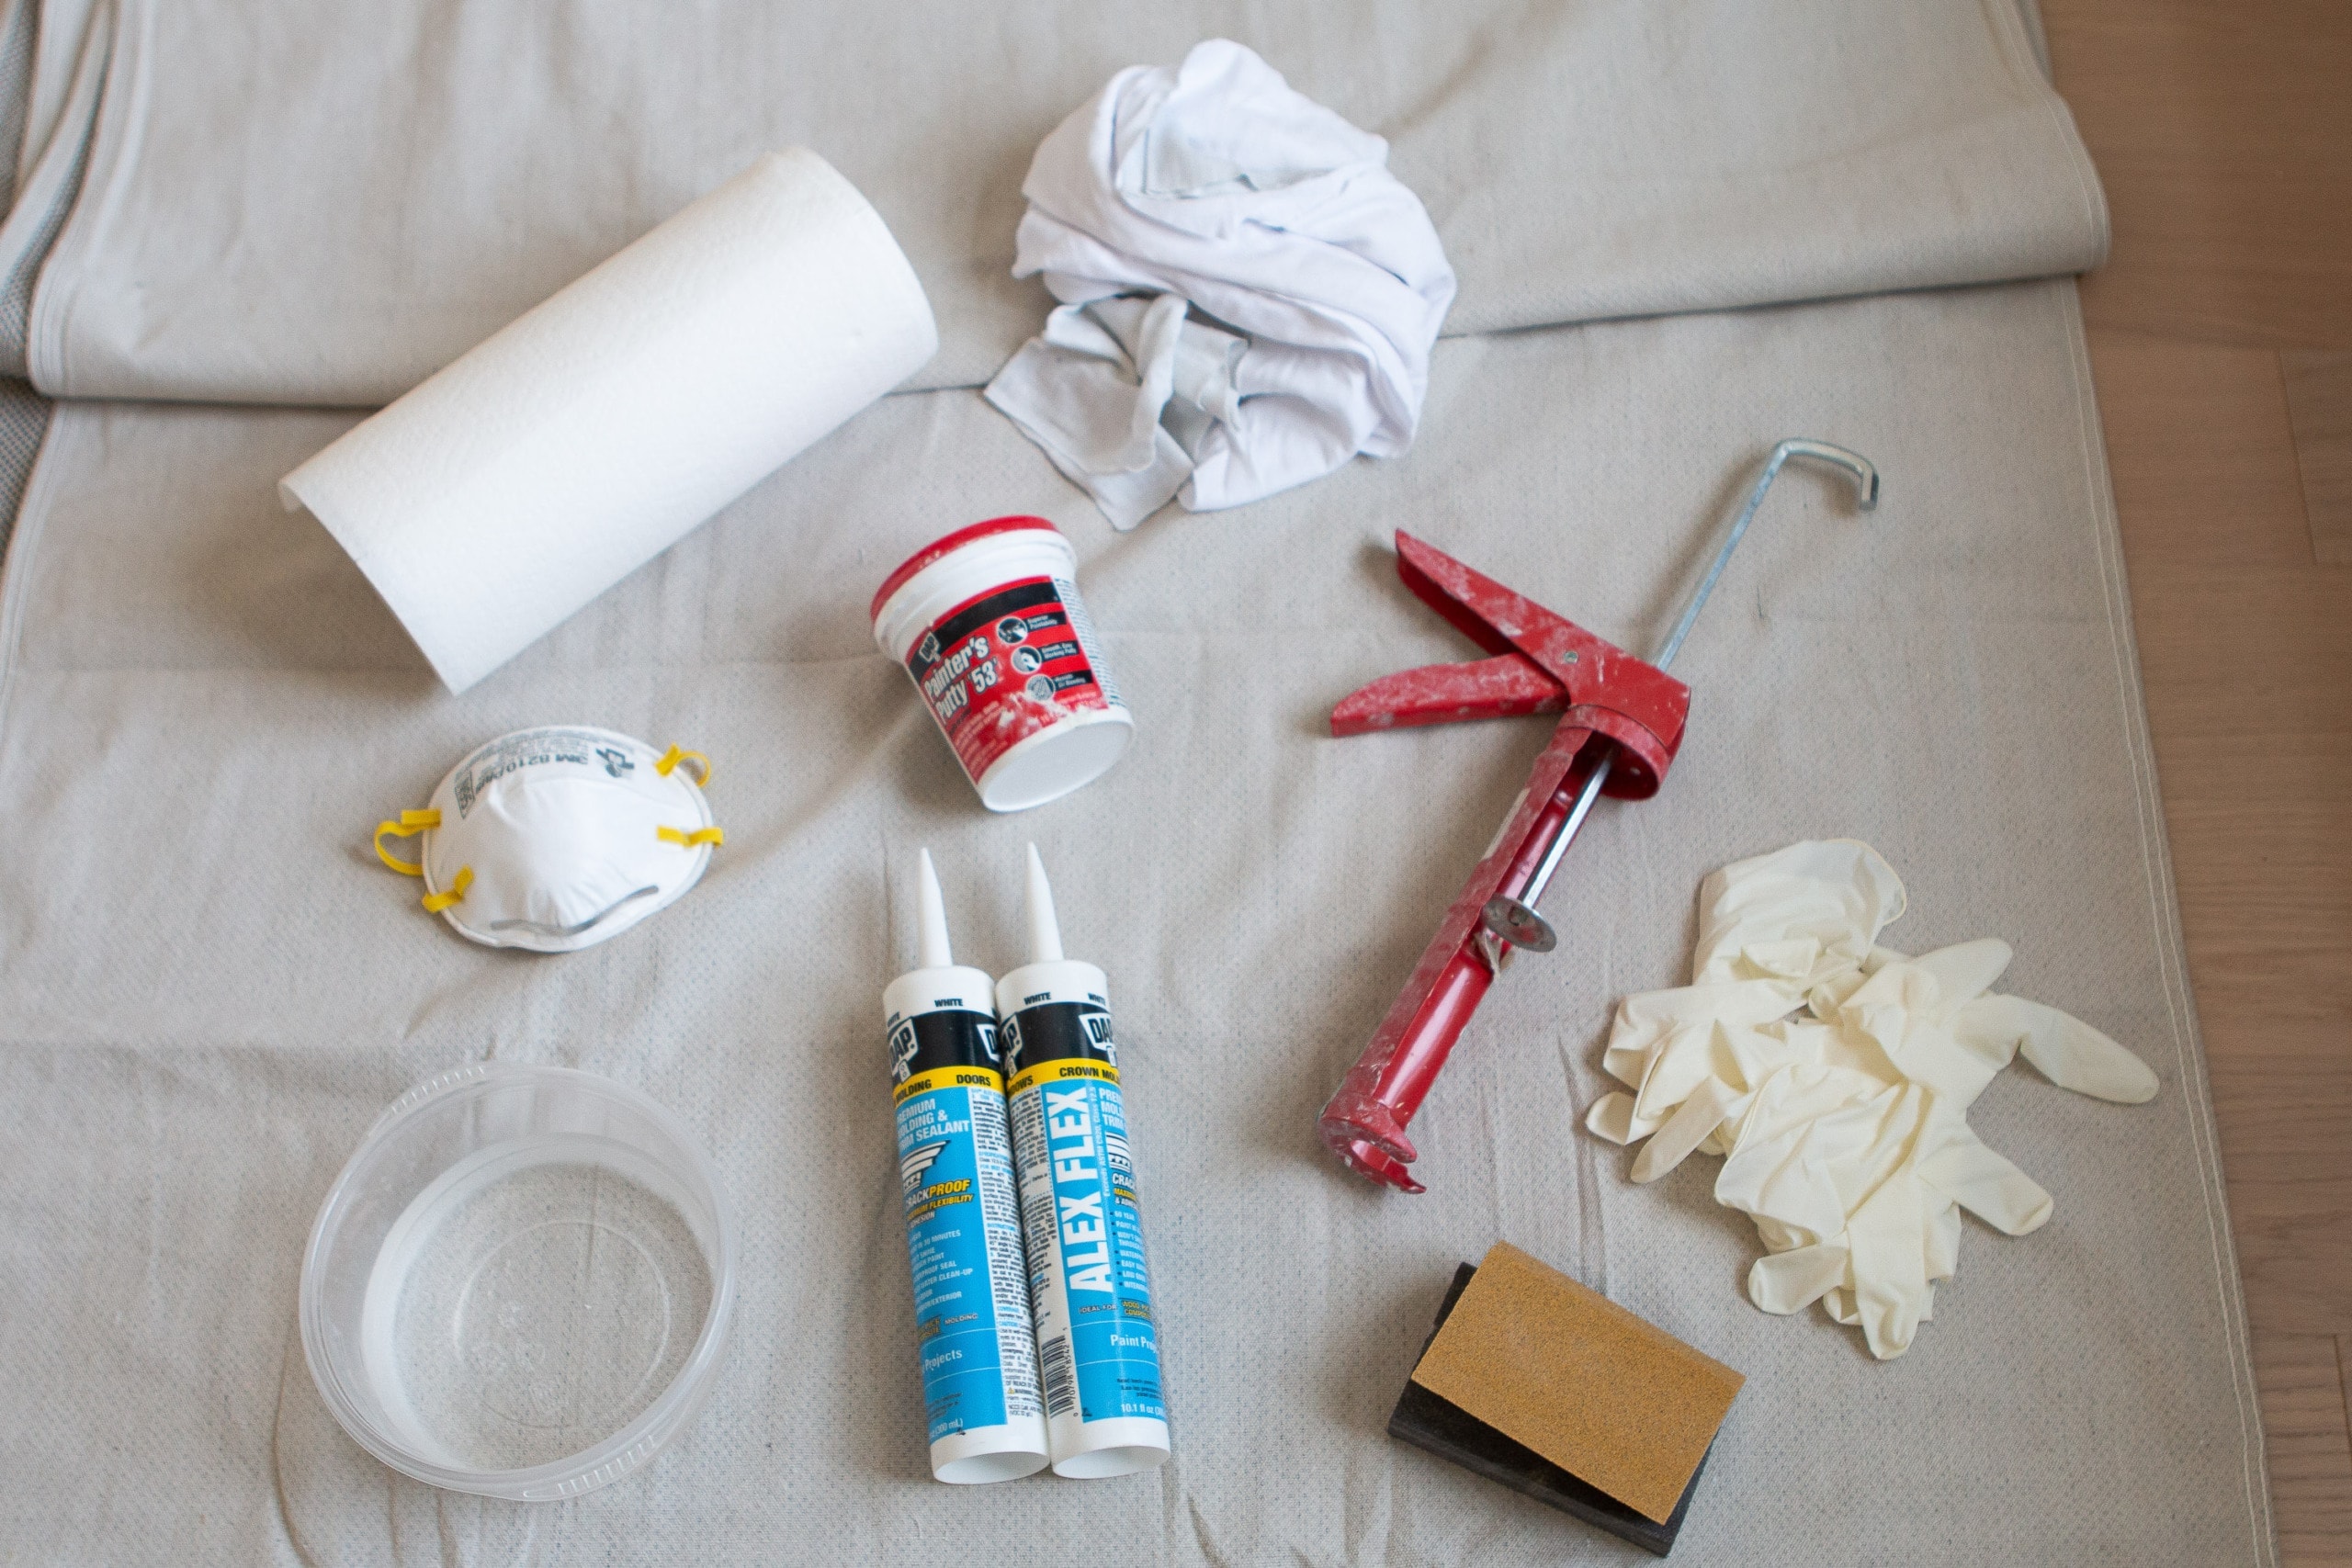 Supplies for prepping a room for paint